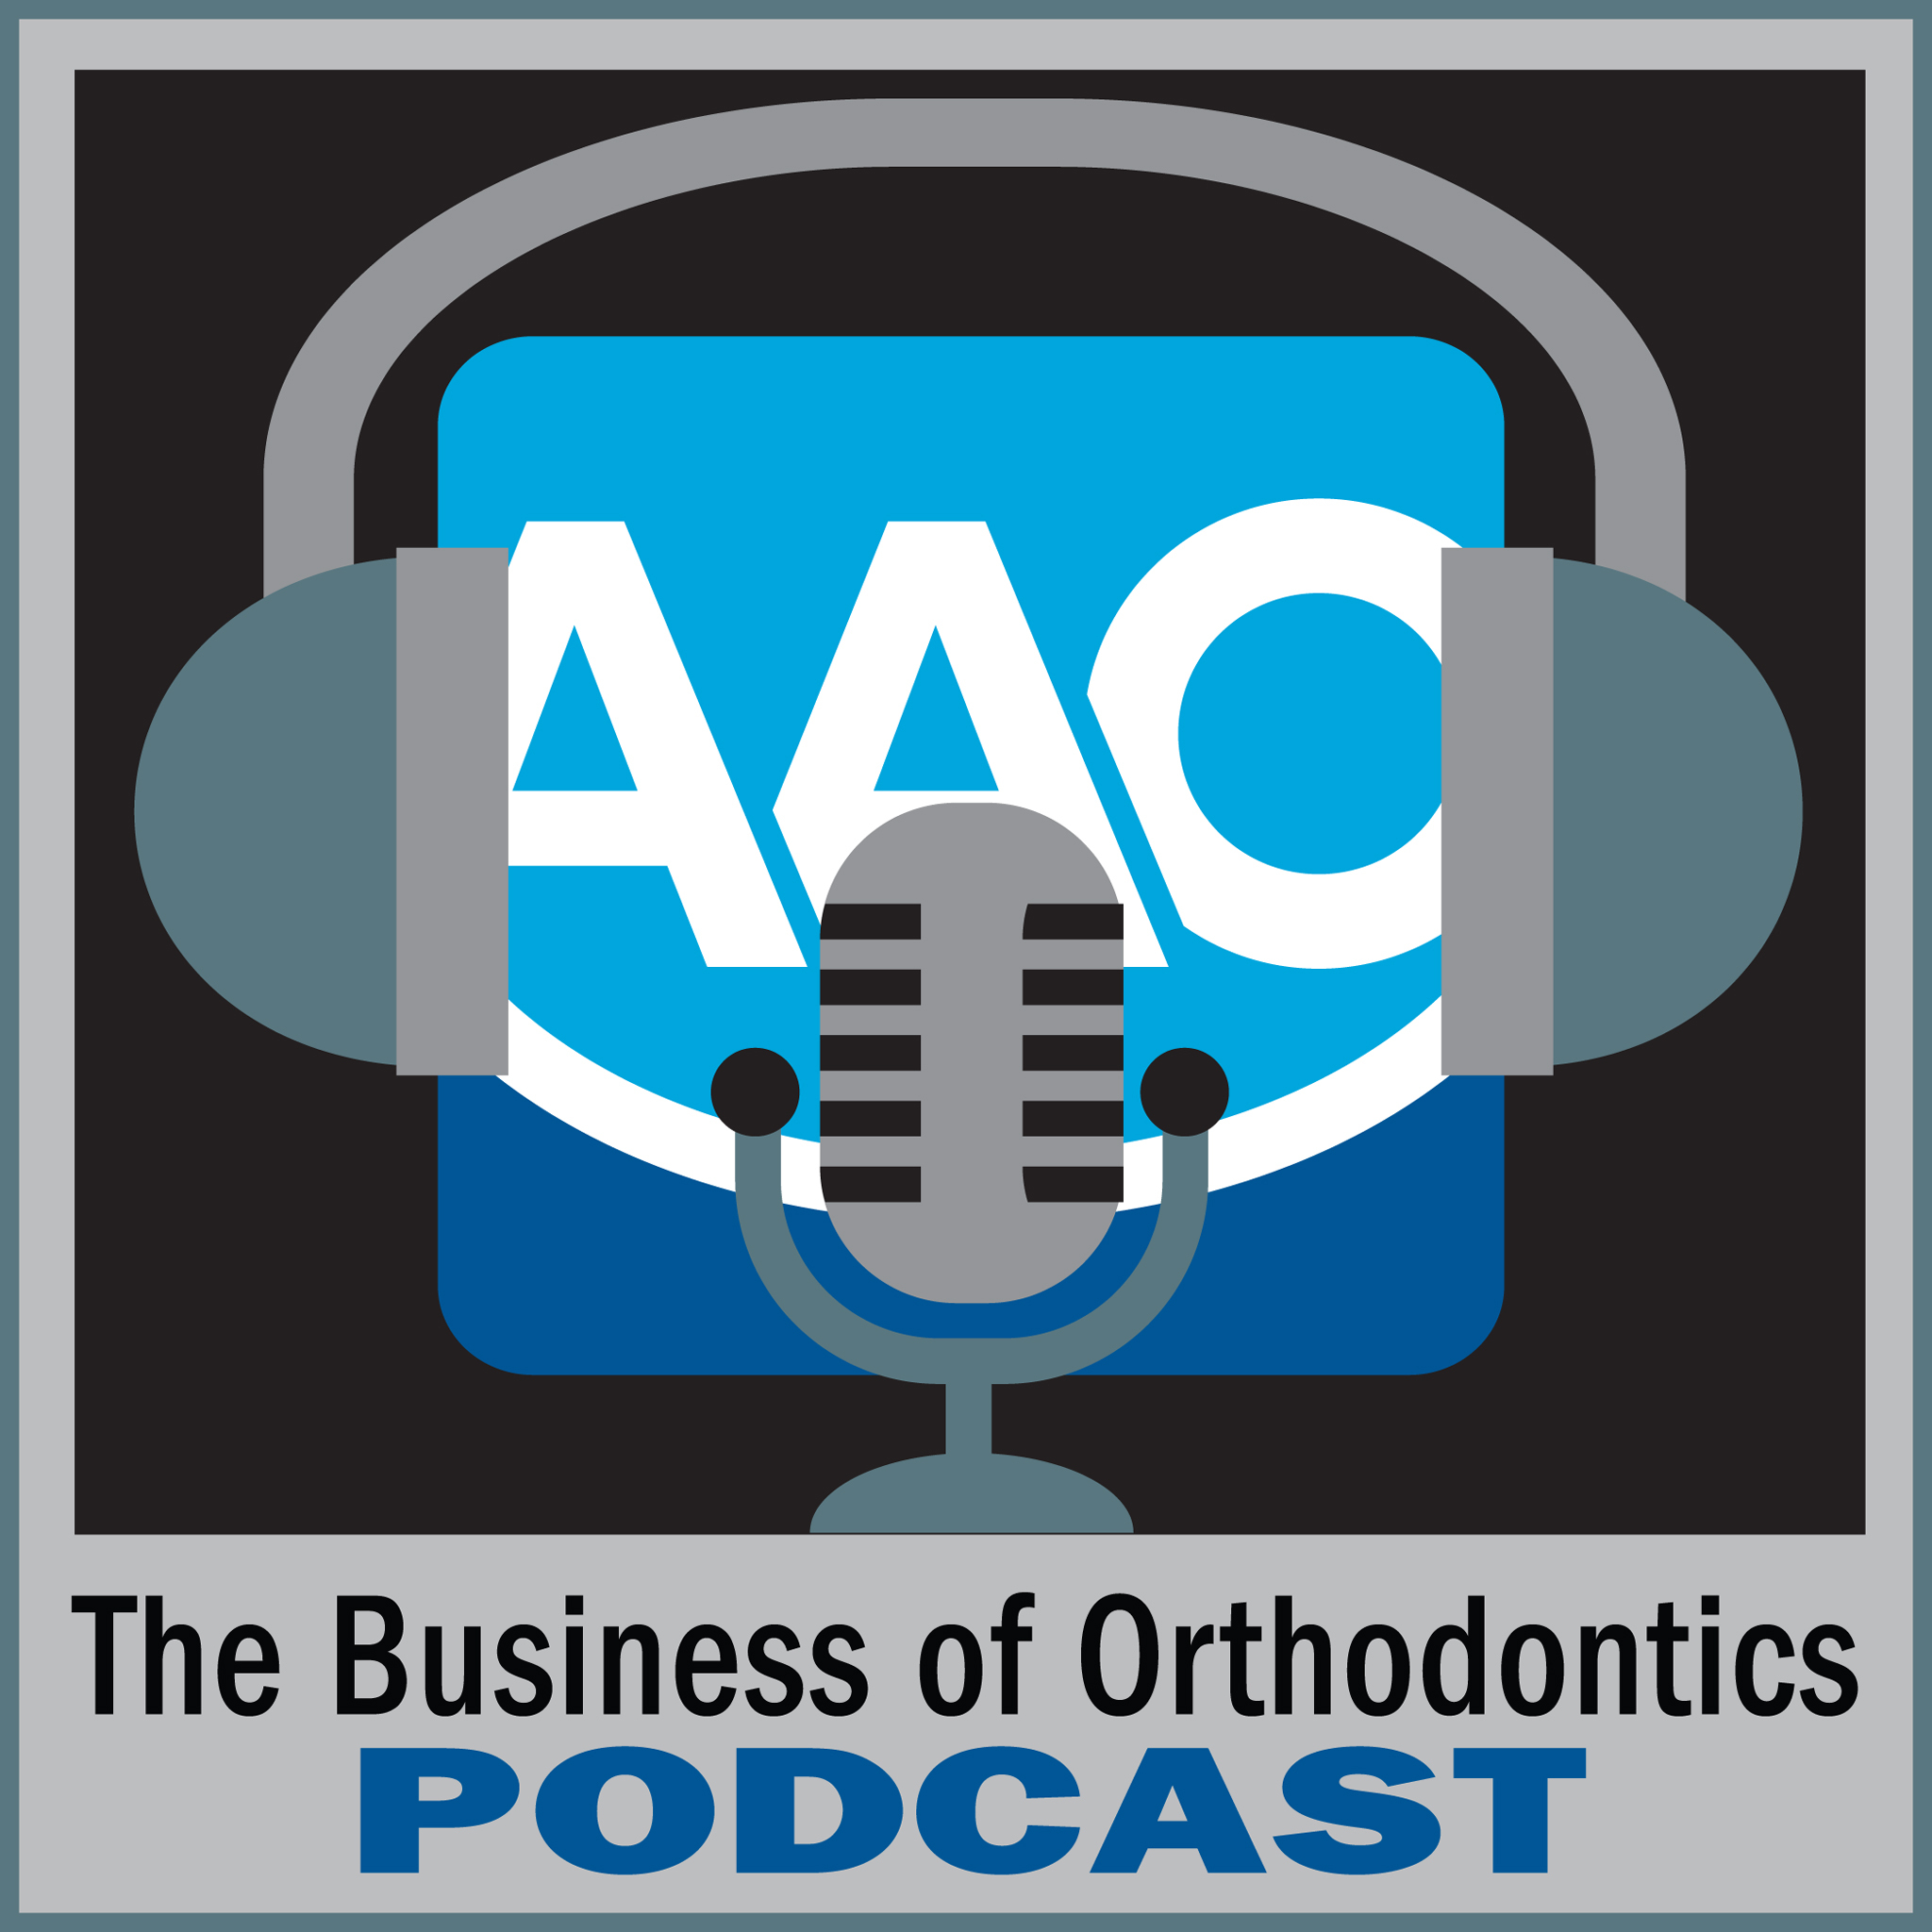 The Business of Orthodontics Podcast - Episode 10